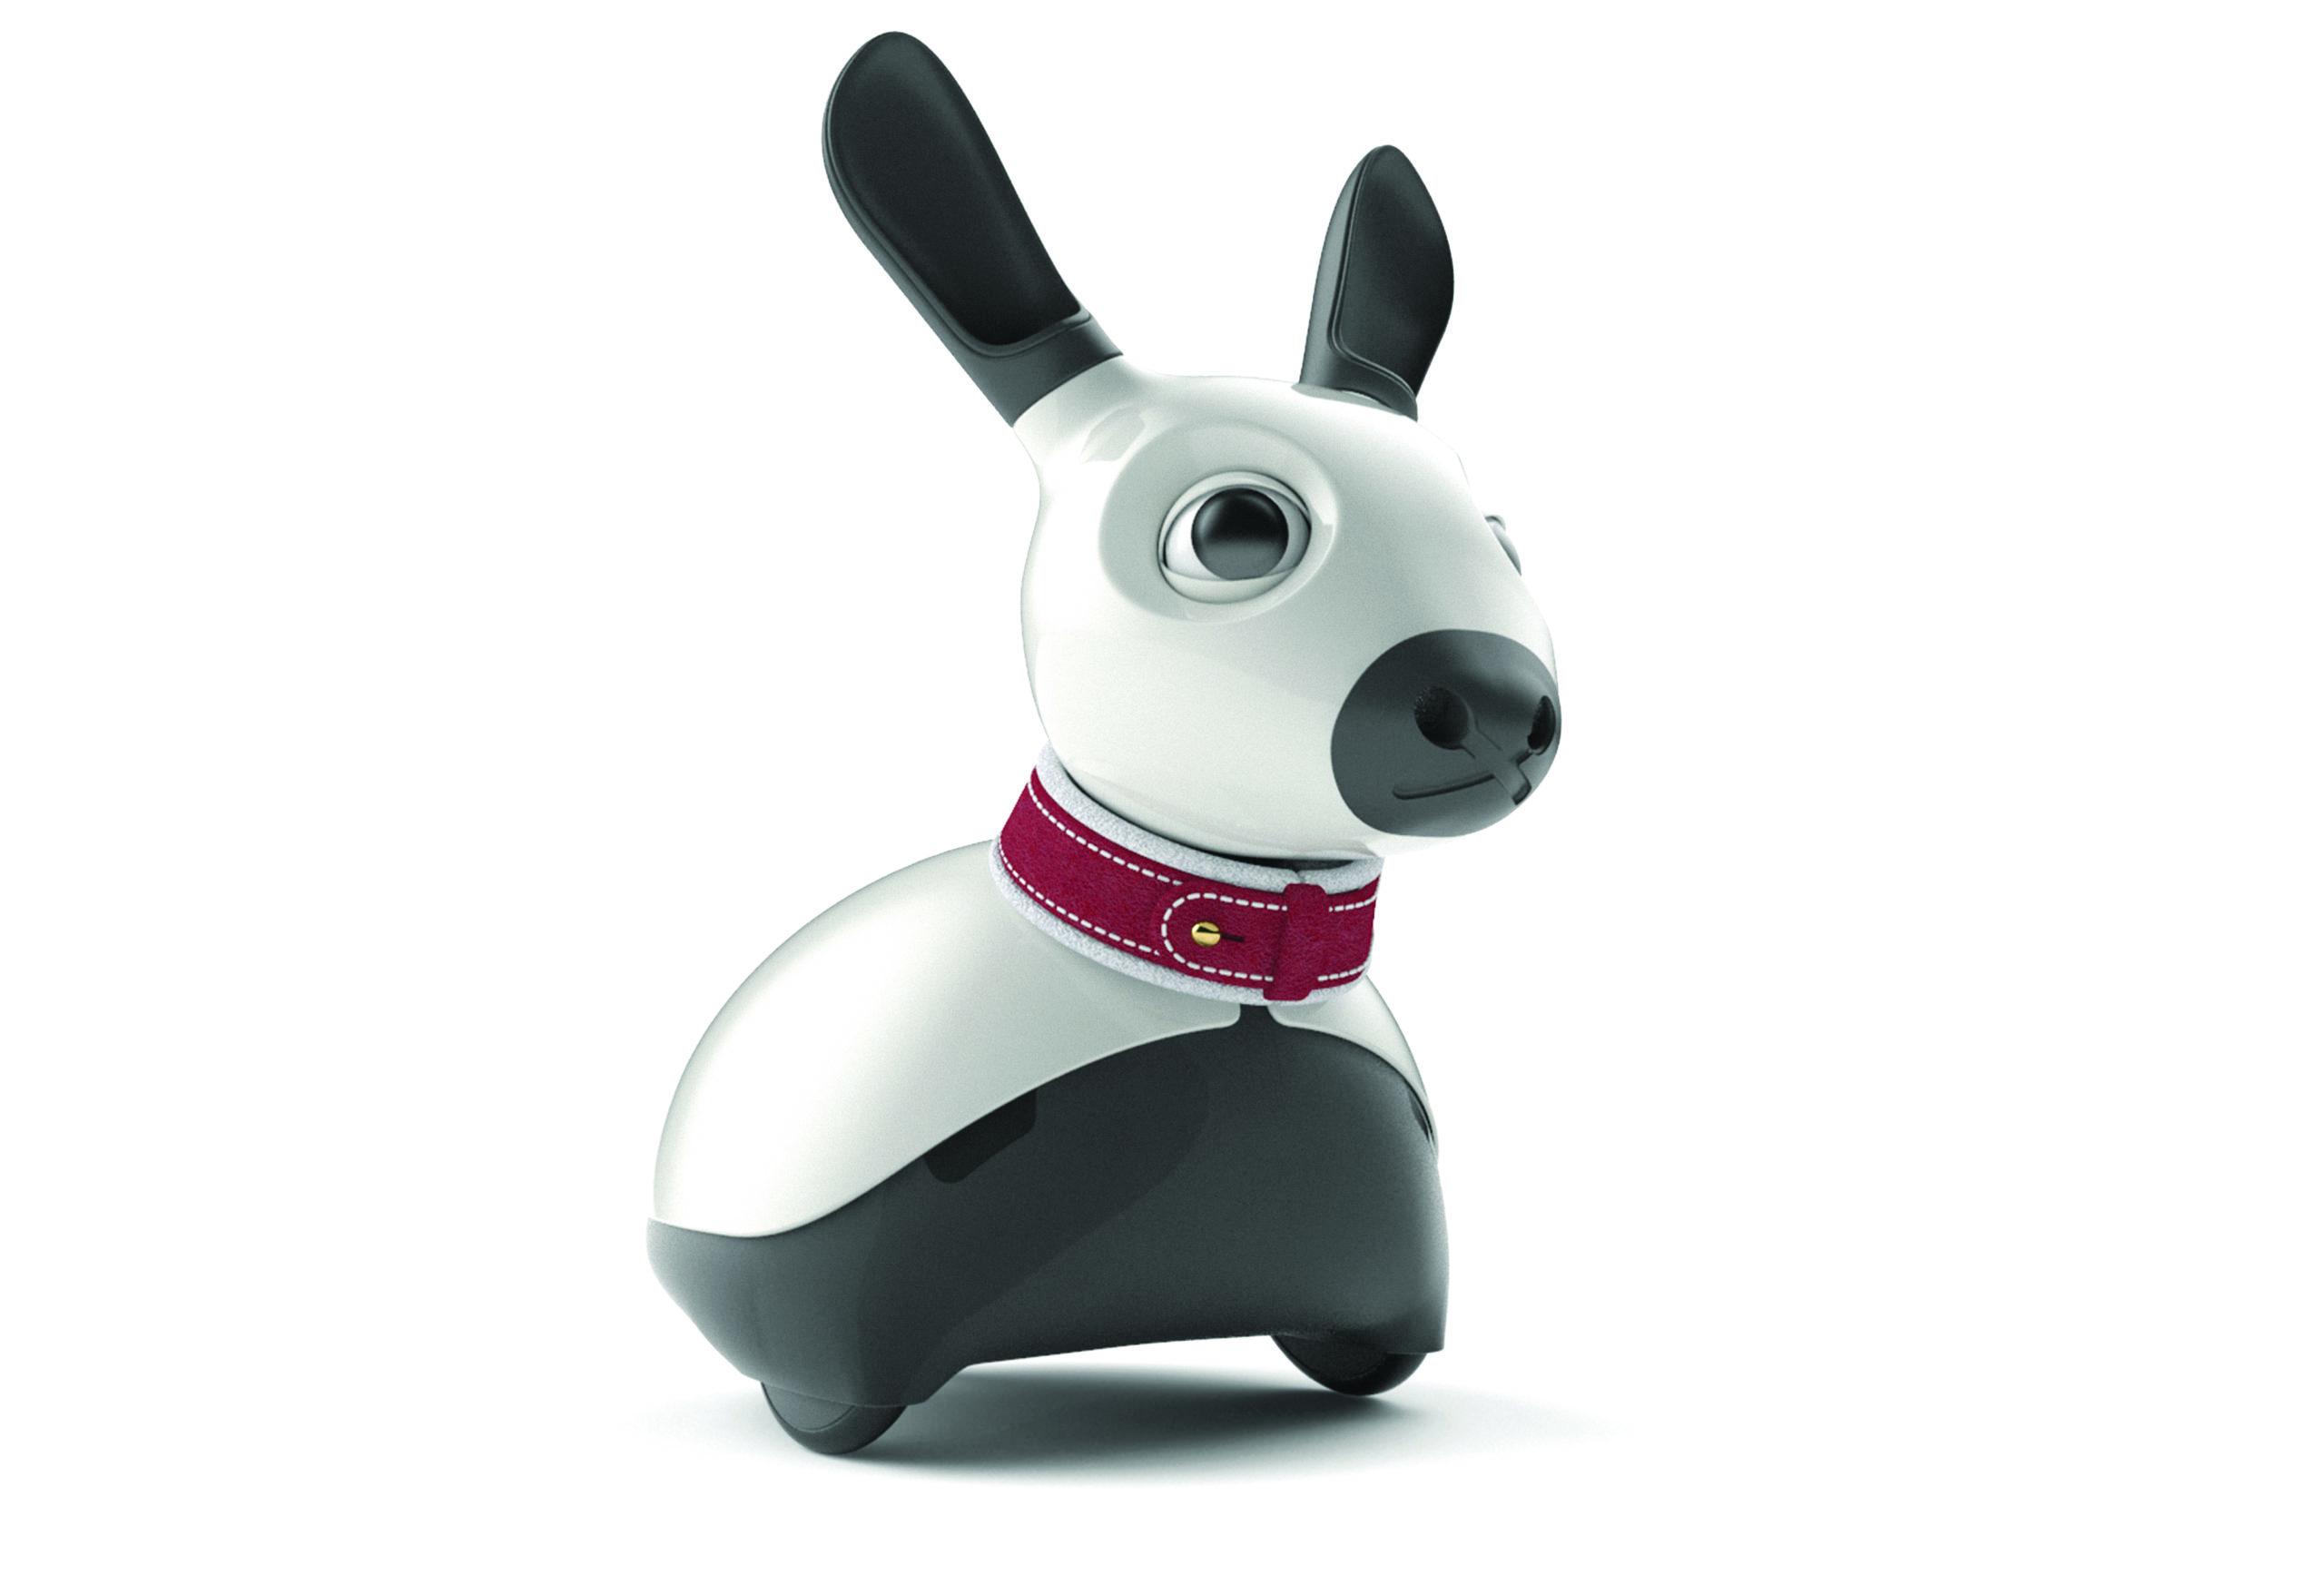 a white and black robot in the shape of a rabbit. It has a red collar around its neck